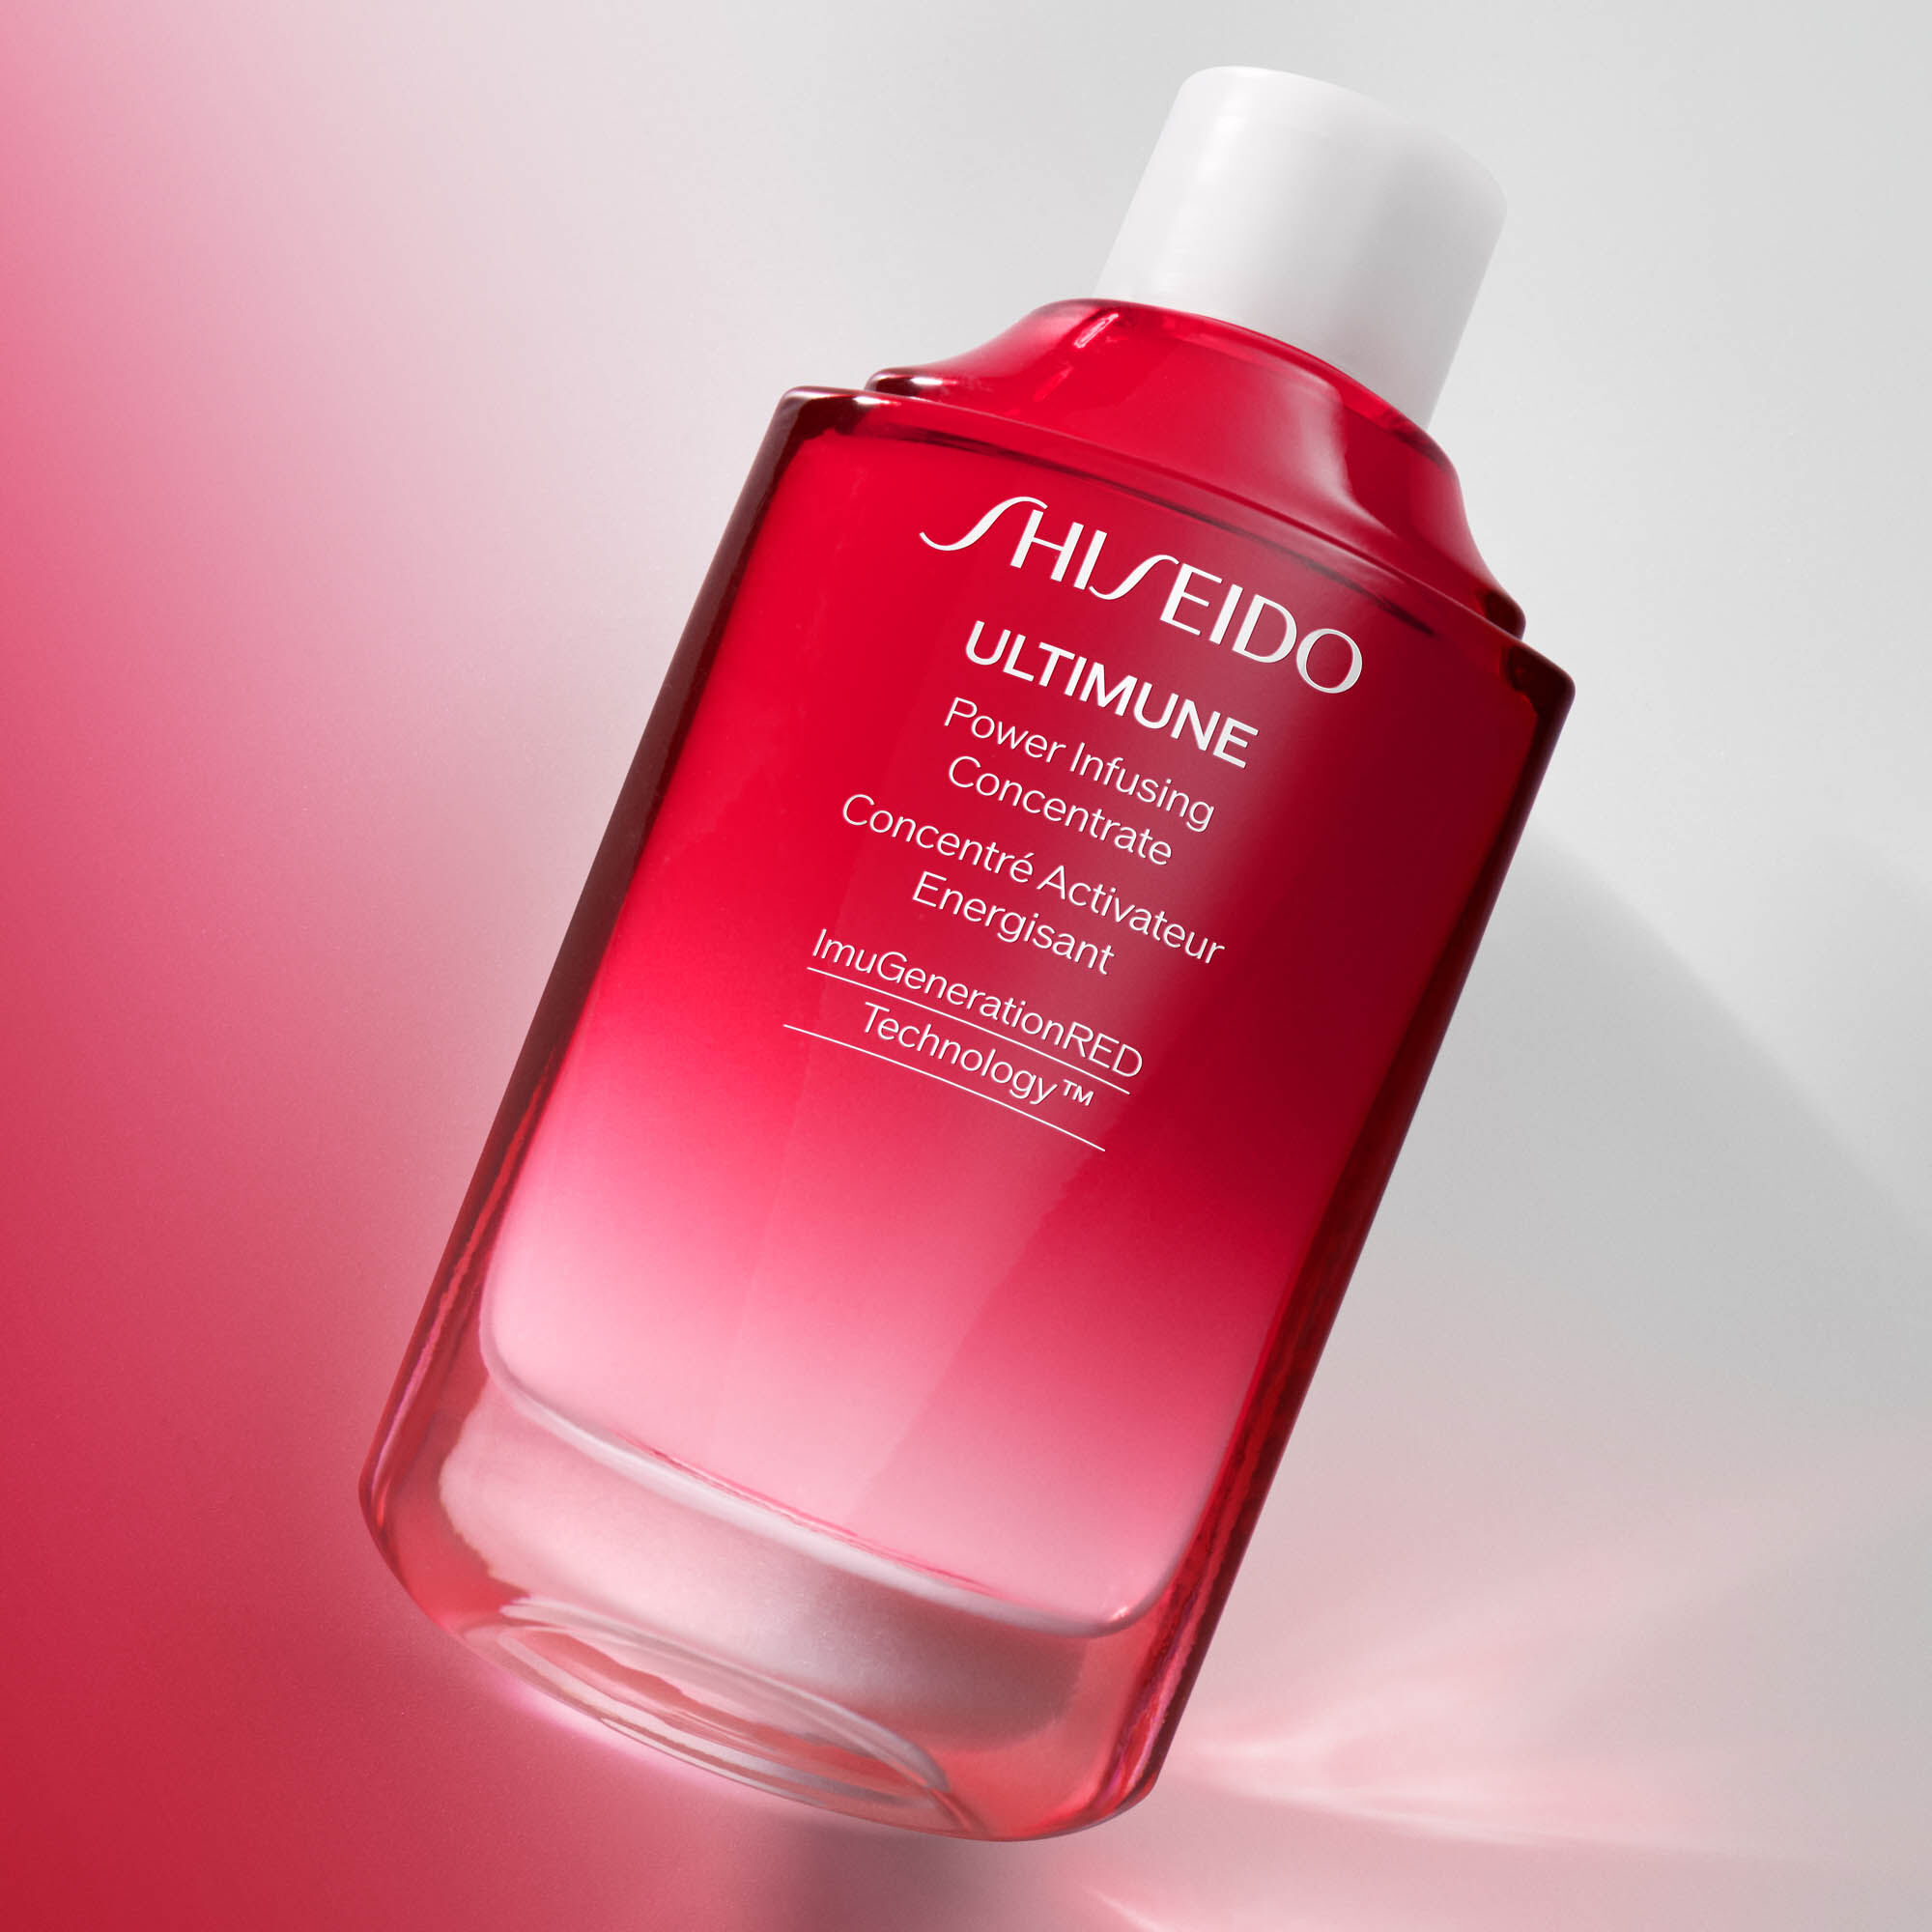 Shiseido NEW Ultimune Power Infusing Concentrate